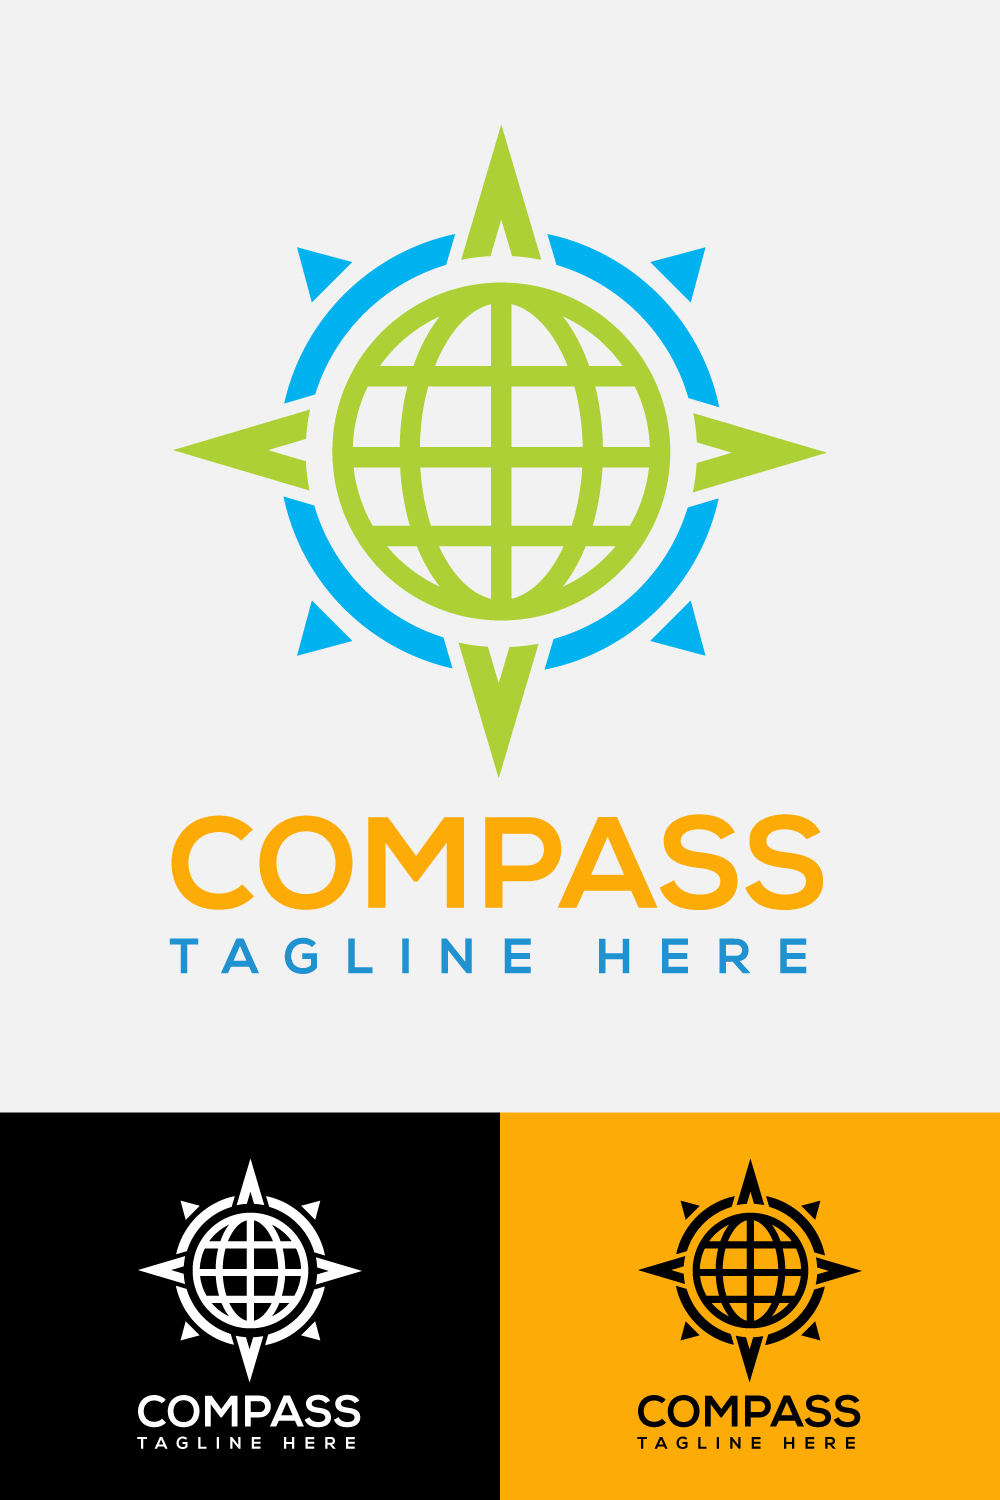 Pack of images of amazing round logos in the form of a compass.